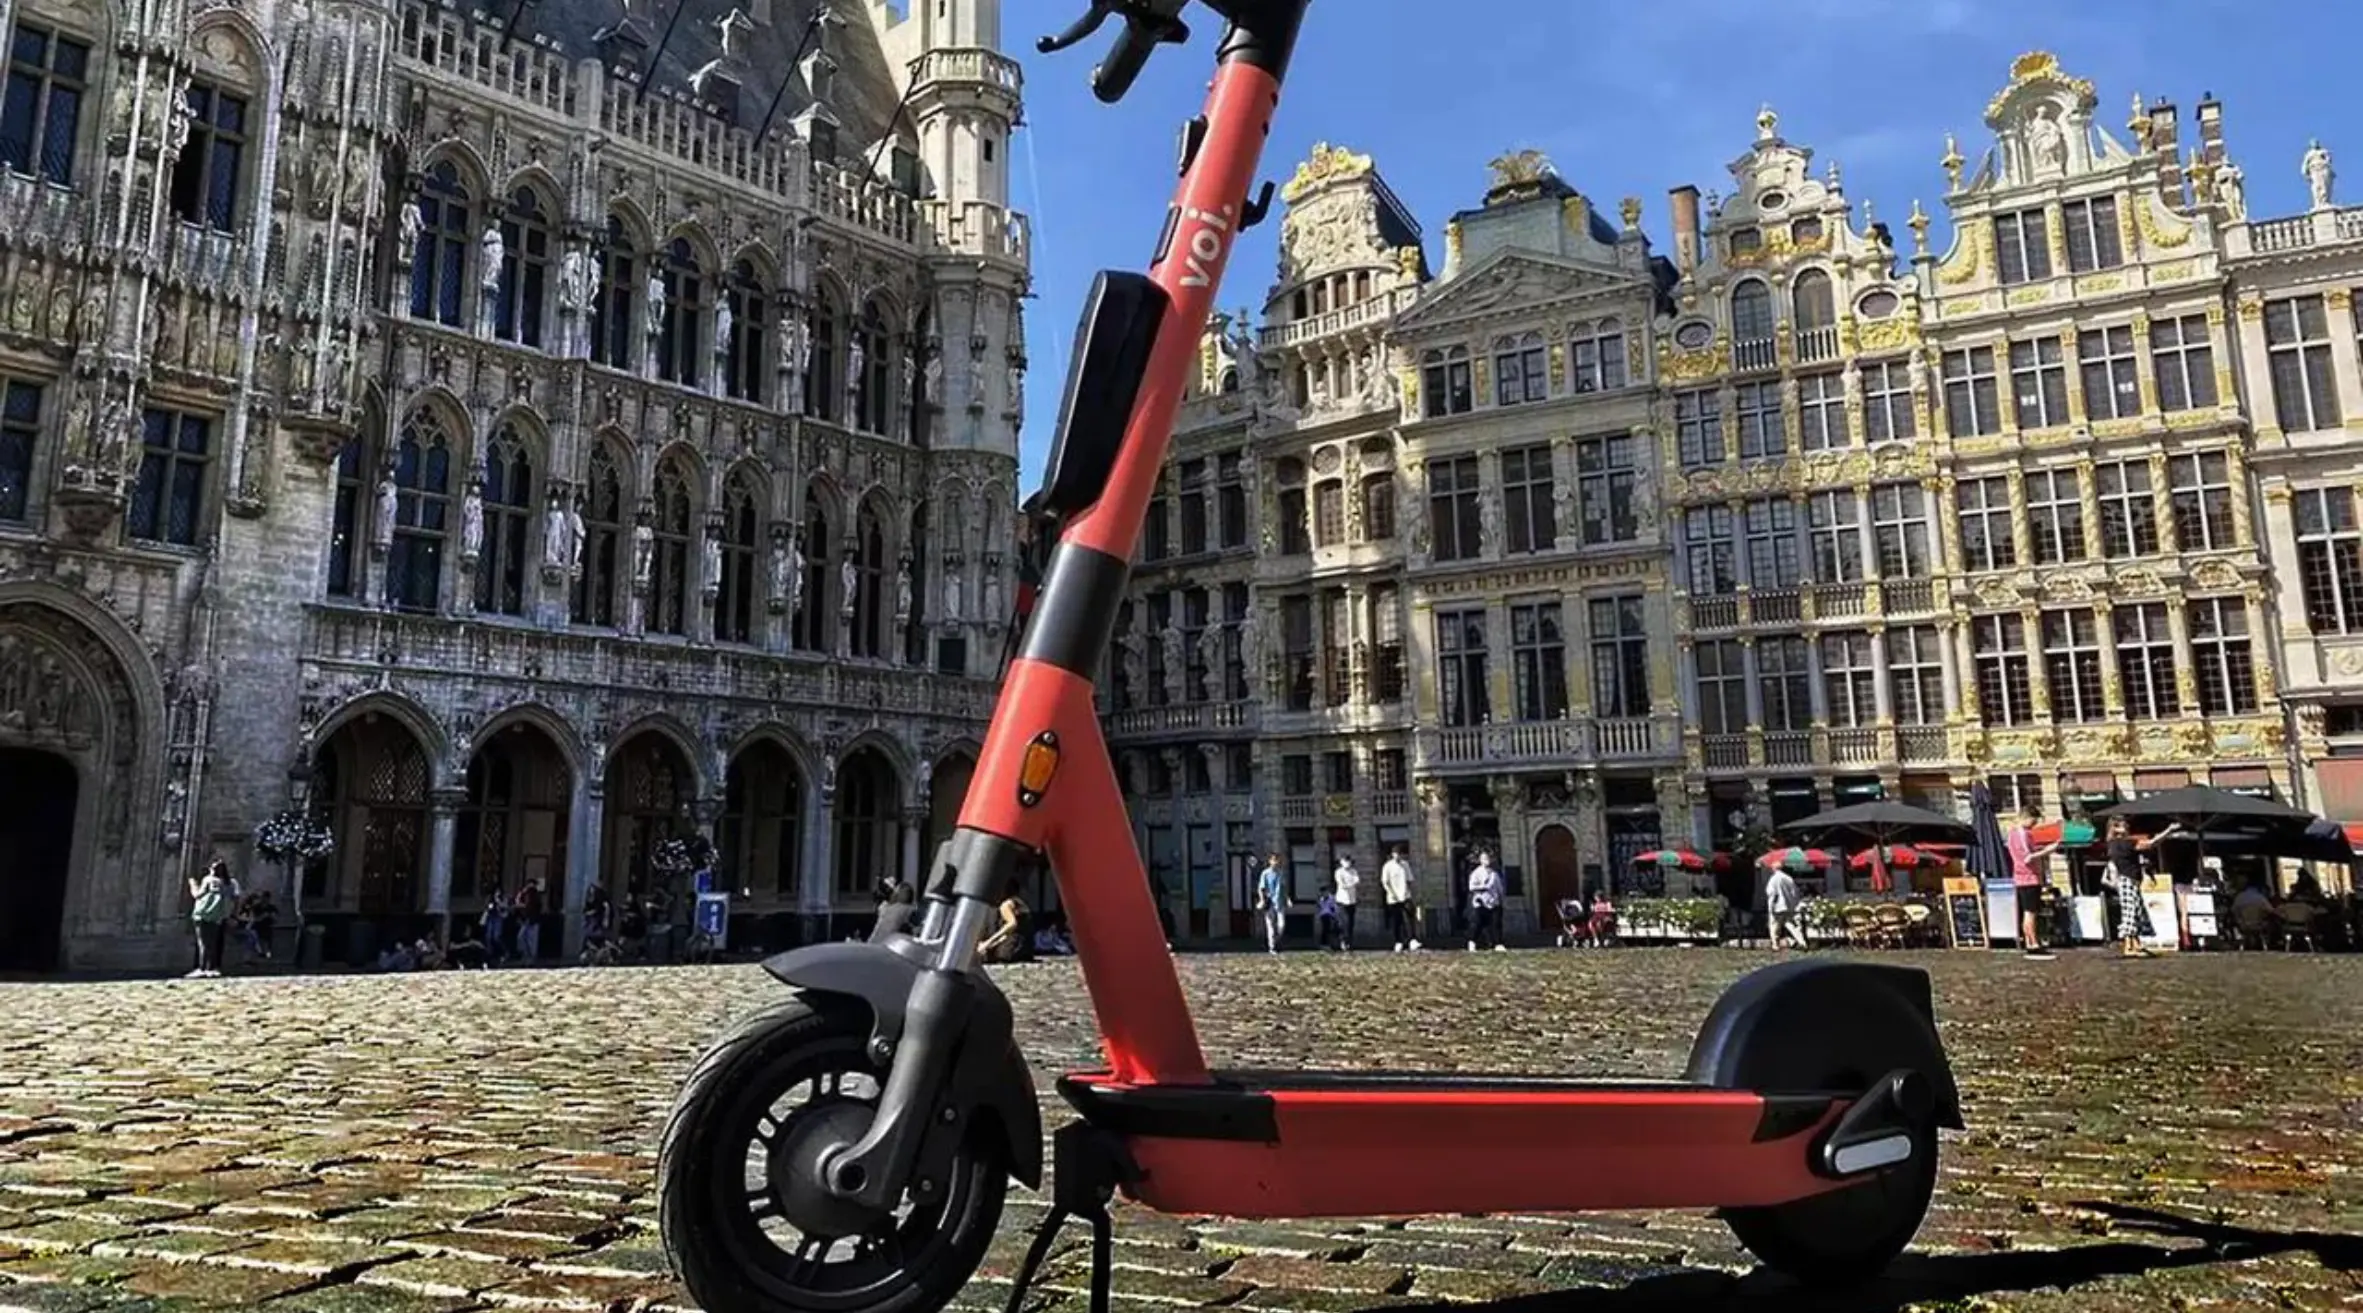 Brussels Scooter Operators Implement Age and Identity Verification to Ensure Safe and Legal Riding